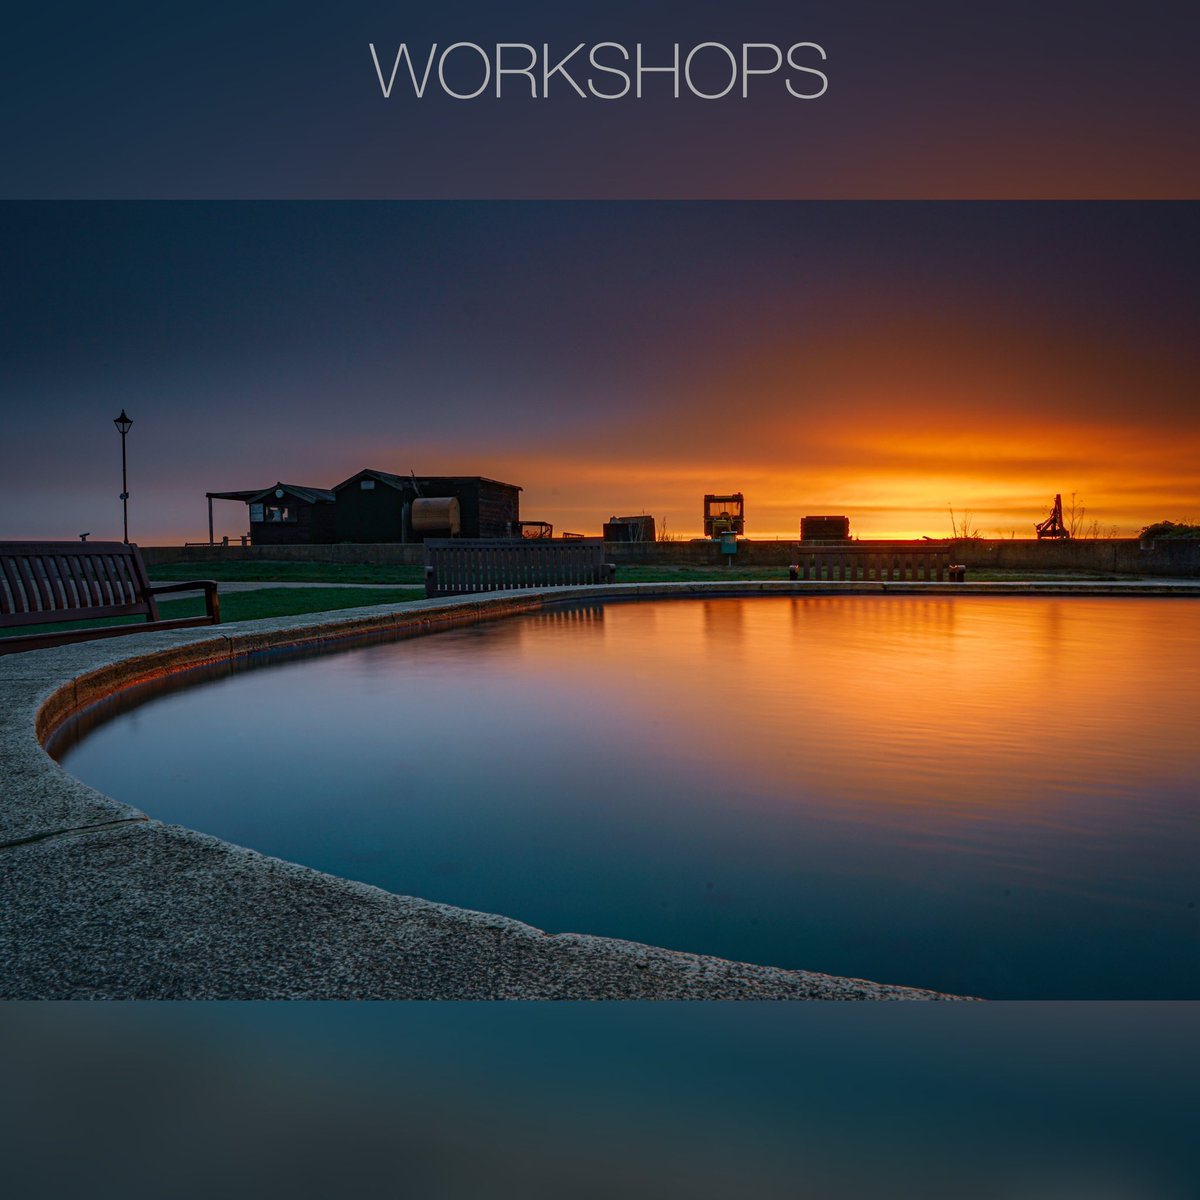 Across the Pond.
Join me on my workshops at tonypickphotography.co.uk/training
.
#aldeburgh #suffolk #suffolkpictures #england #Bestunitedkingdom  #PhotosofBritain #ExcellentBritain #placesinuk #littlepiecesofbritain #photographer #teacher #phototraining